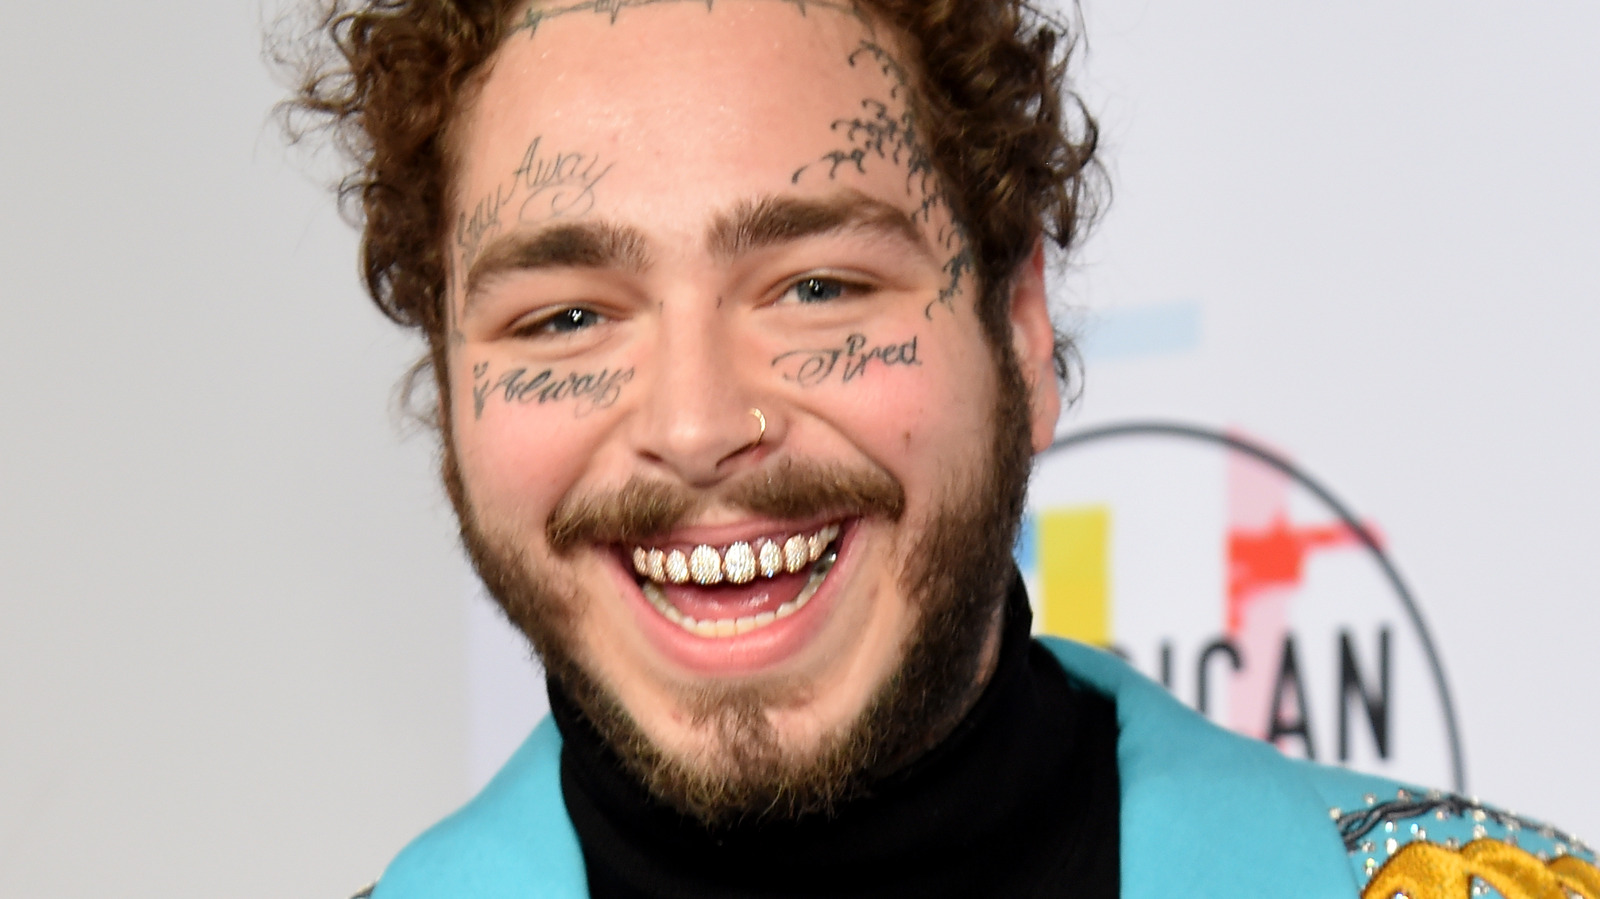 Post Malone Found Room for a New Face Tattoo  Tattoo Ideas Artists and  Models